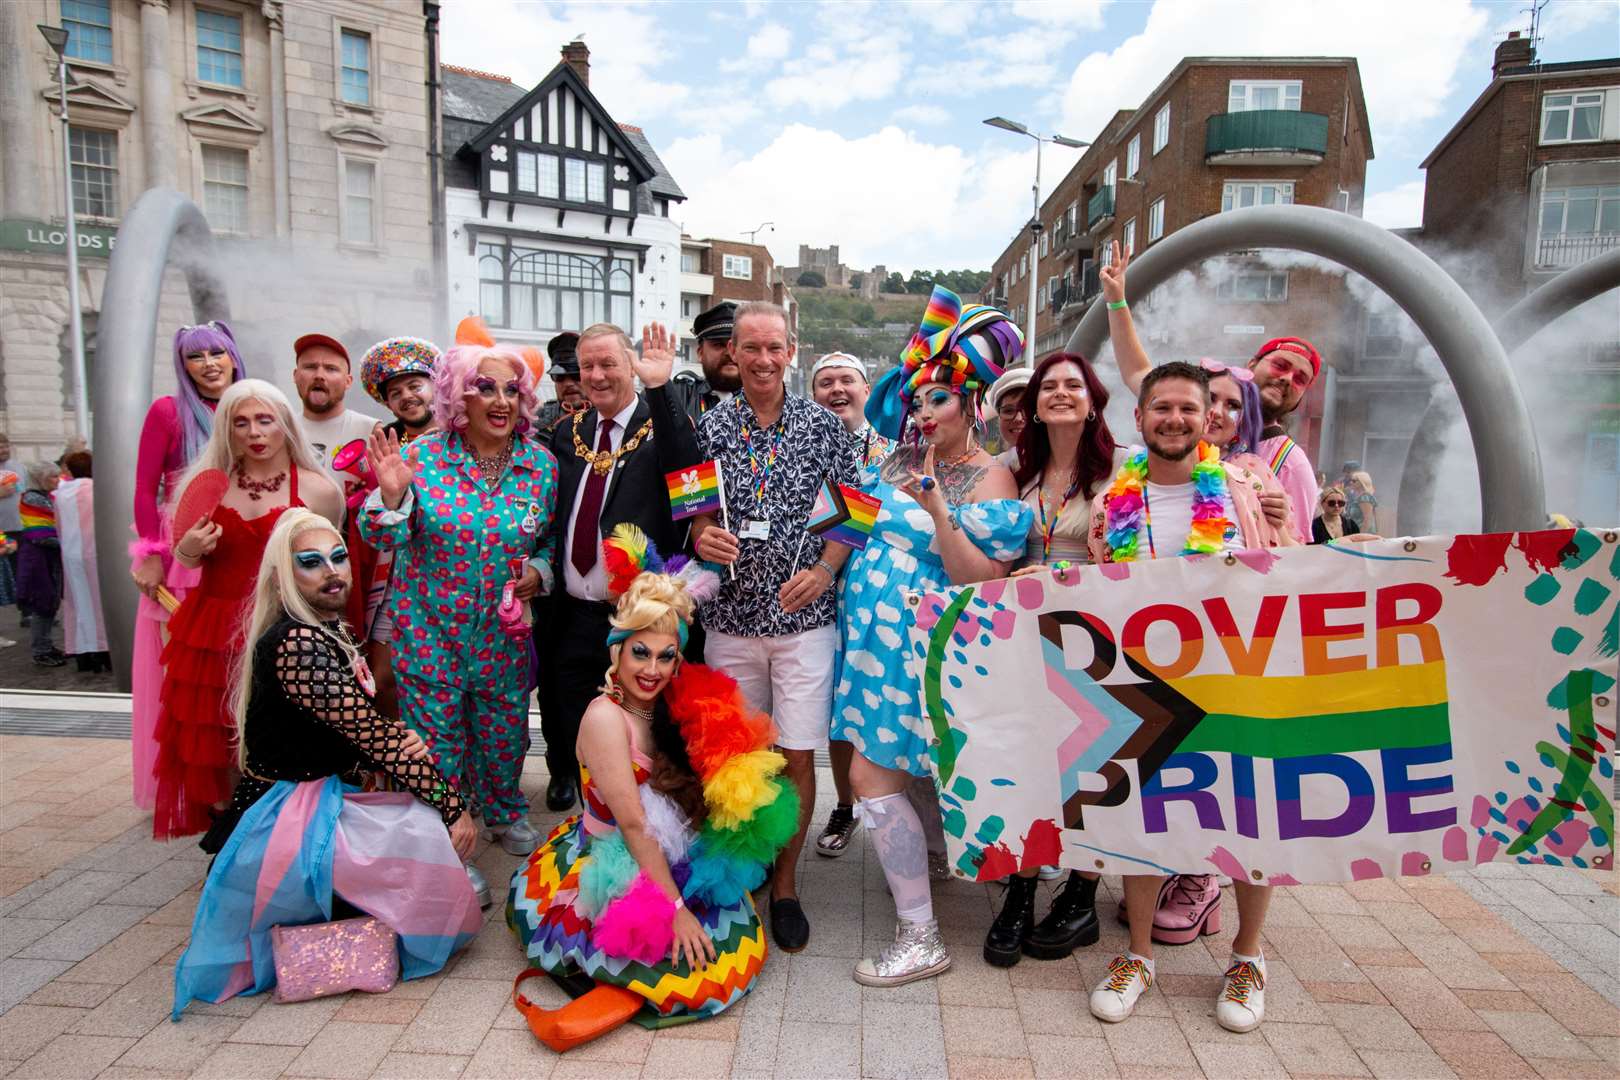 The Pride core team with the Mayor of Dover Cllr Gordon Cowan and Cllr Trevor Bartlett leader of the council. Photo: Dover Pride/David Goodson Photography